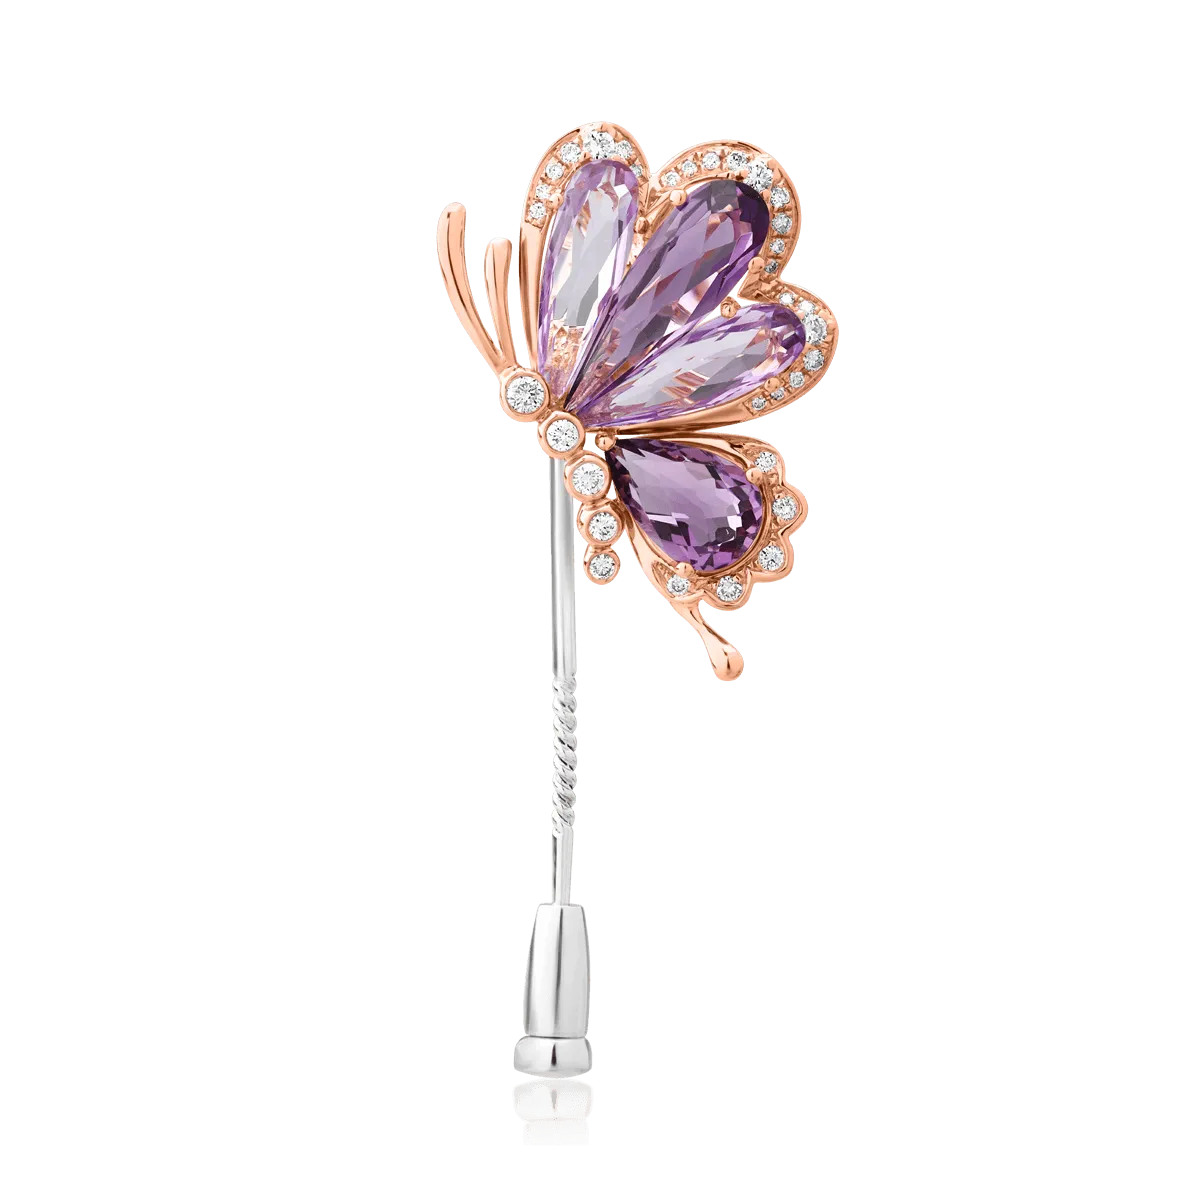 18K rose gold brooch with 6.8ct precious and semi-precious stones